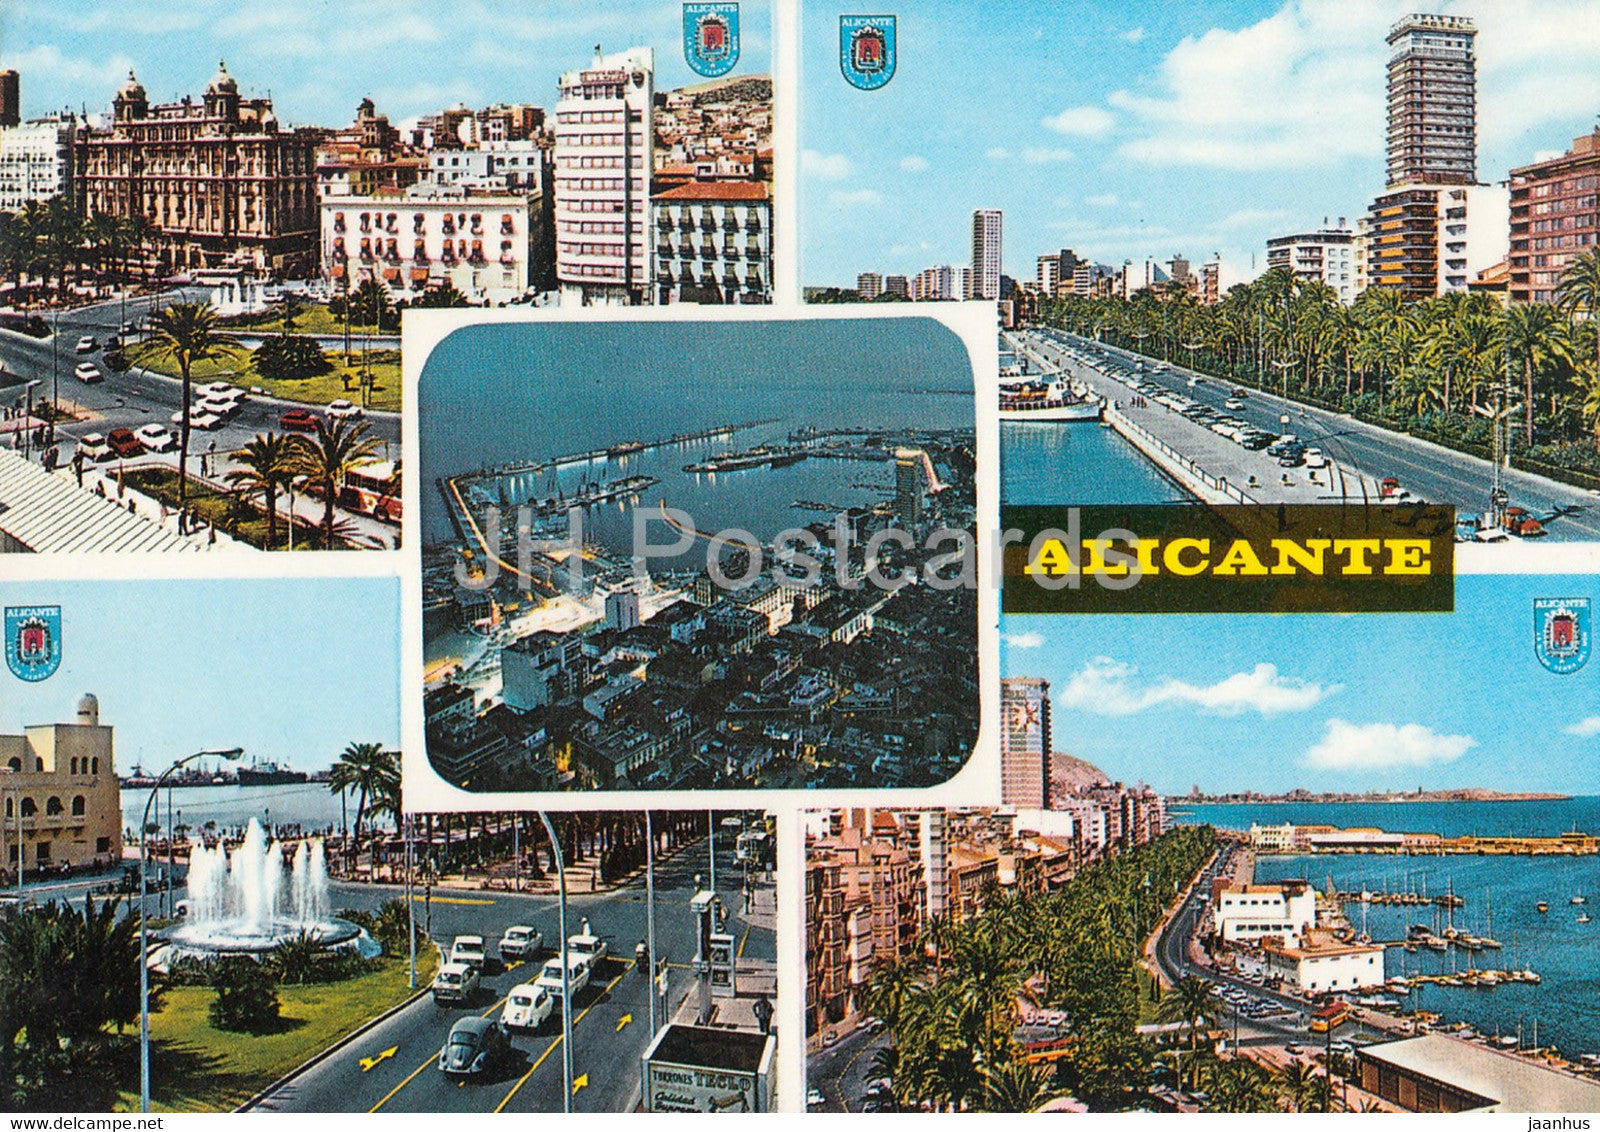 Alicante - City streets - multiview - 114 - 1987 - Spain -  used - JH Postcards